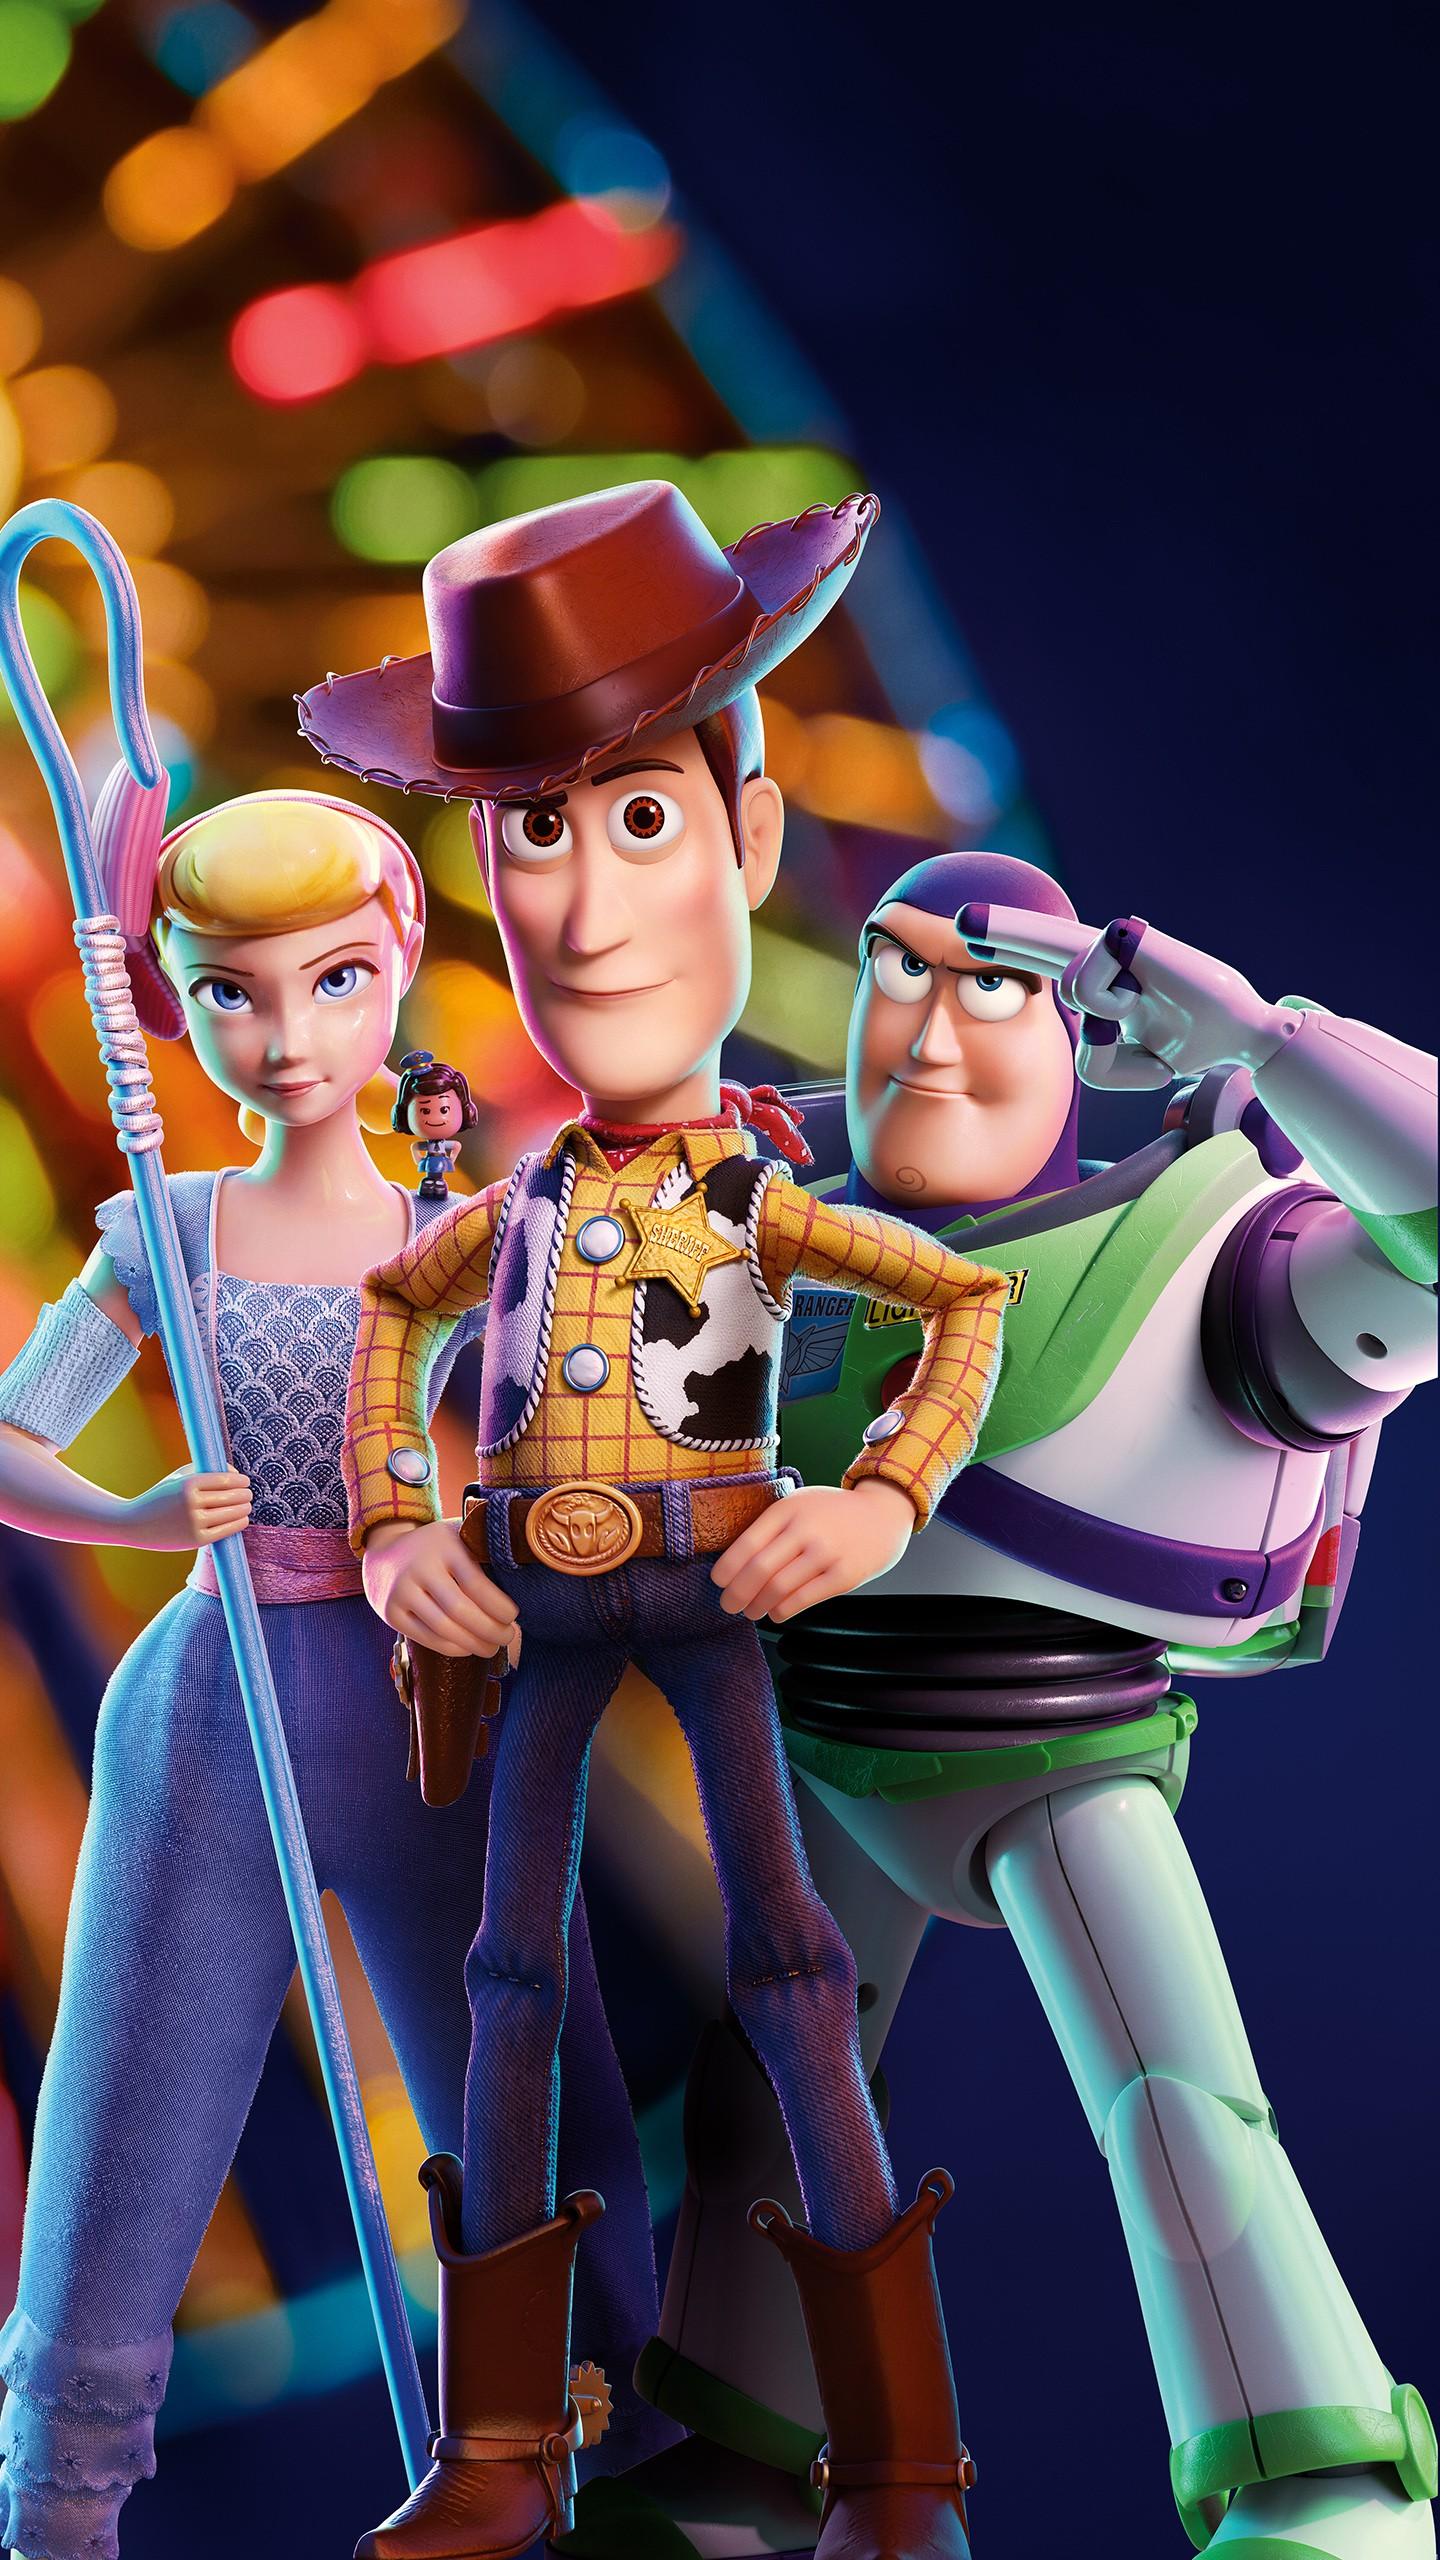 Woody Toy Story Wallpaper